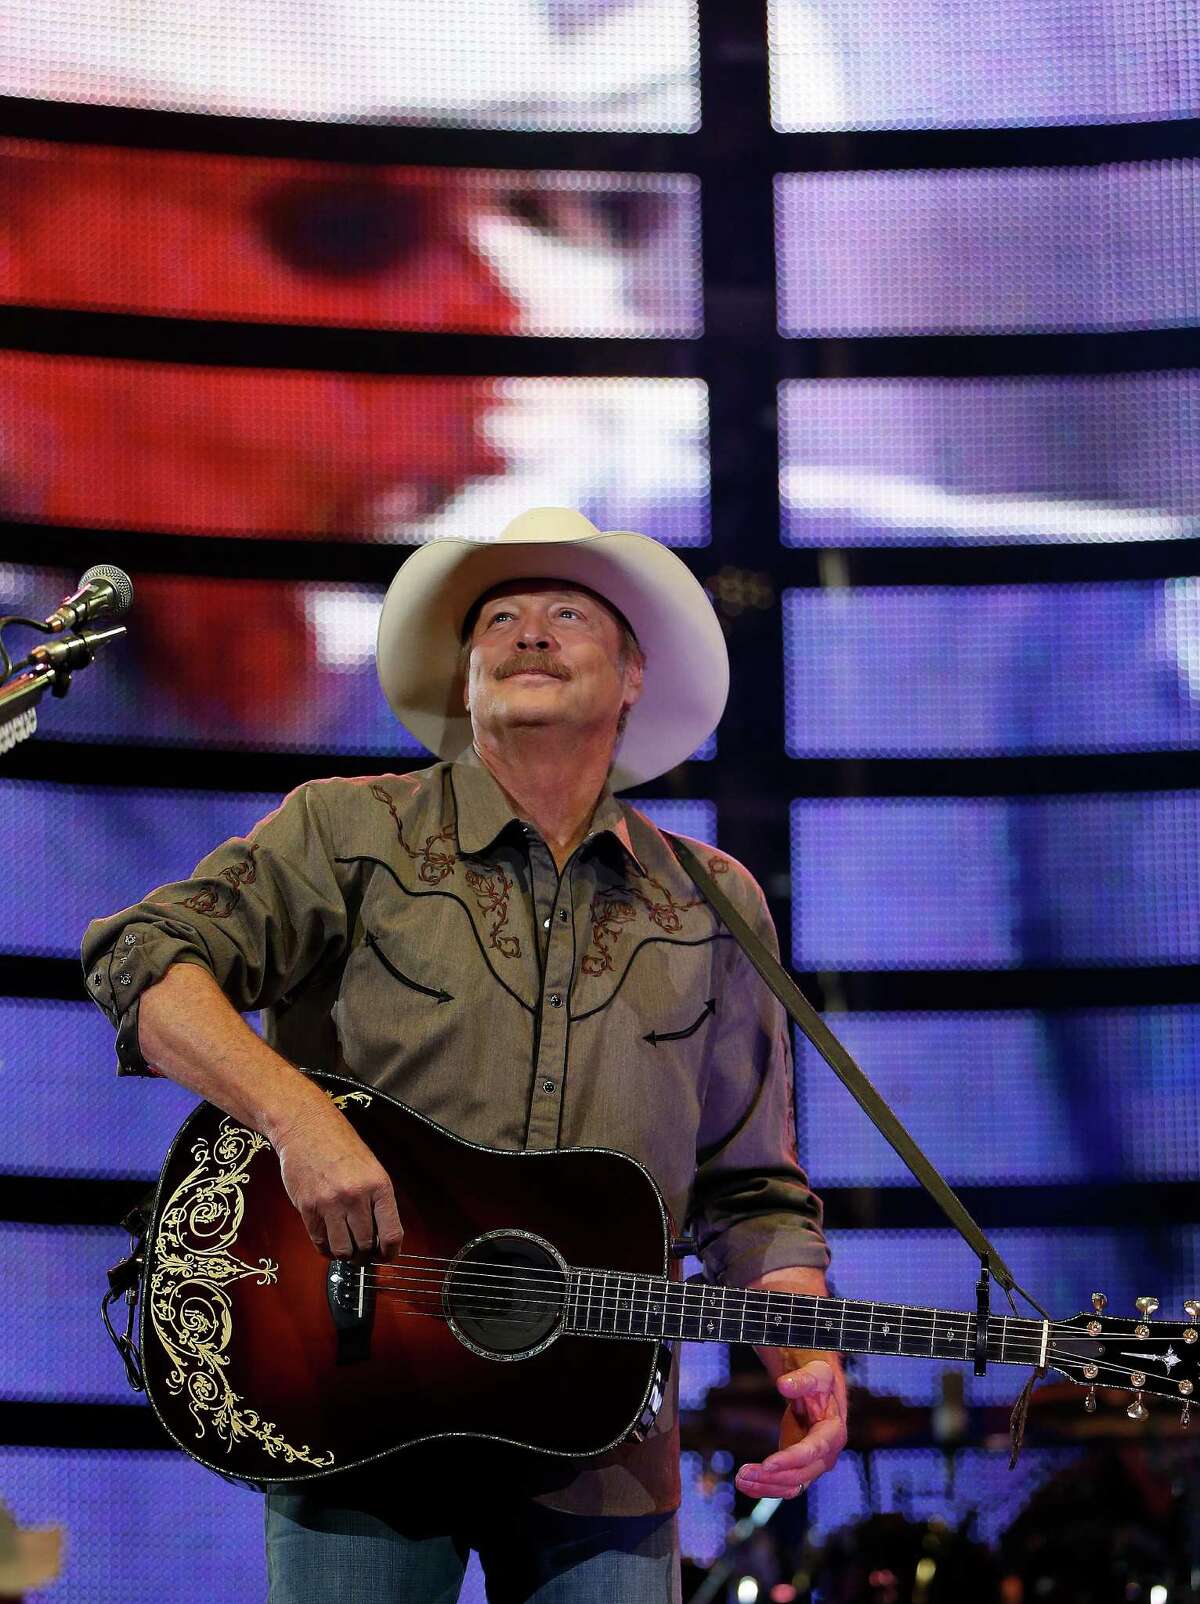 Alan Jackson previews a new tune, "You Never Know," on Saturday during RodeoHouston.